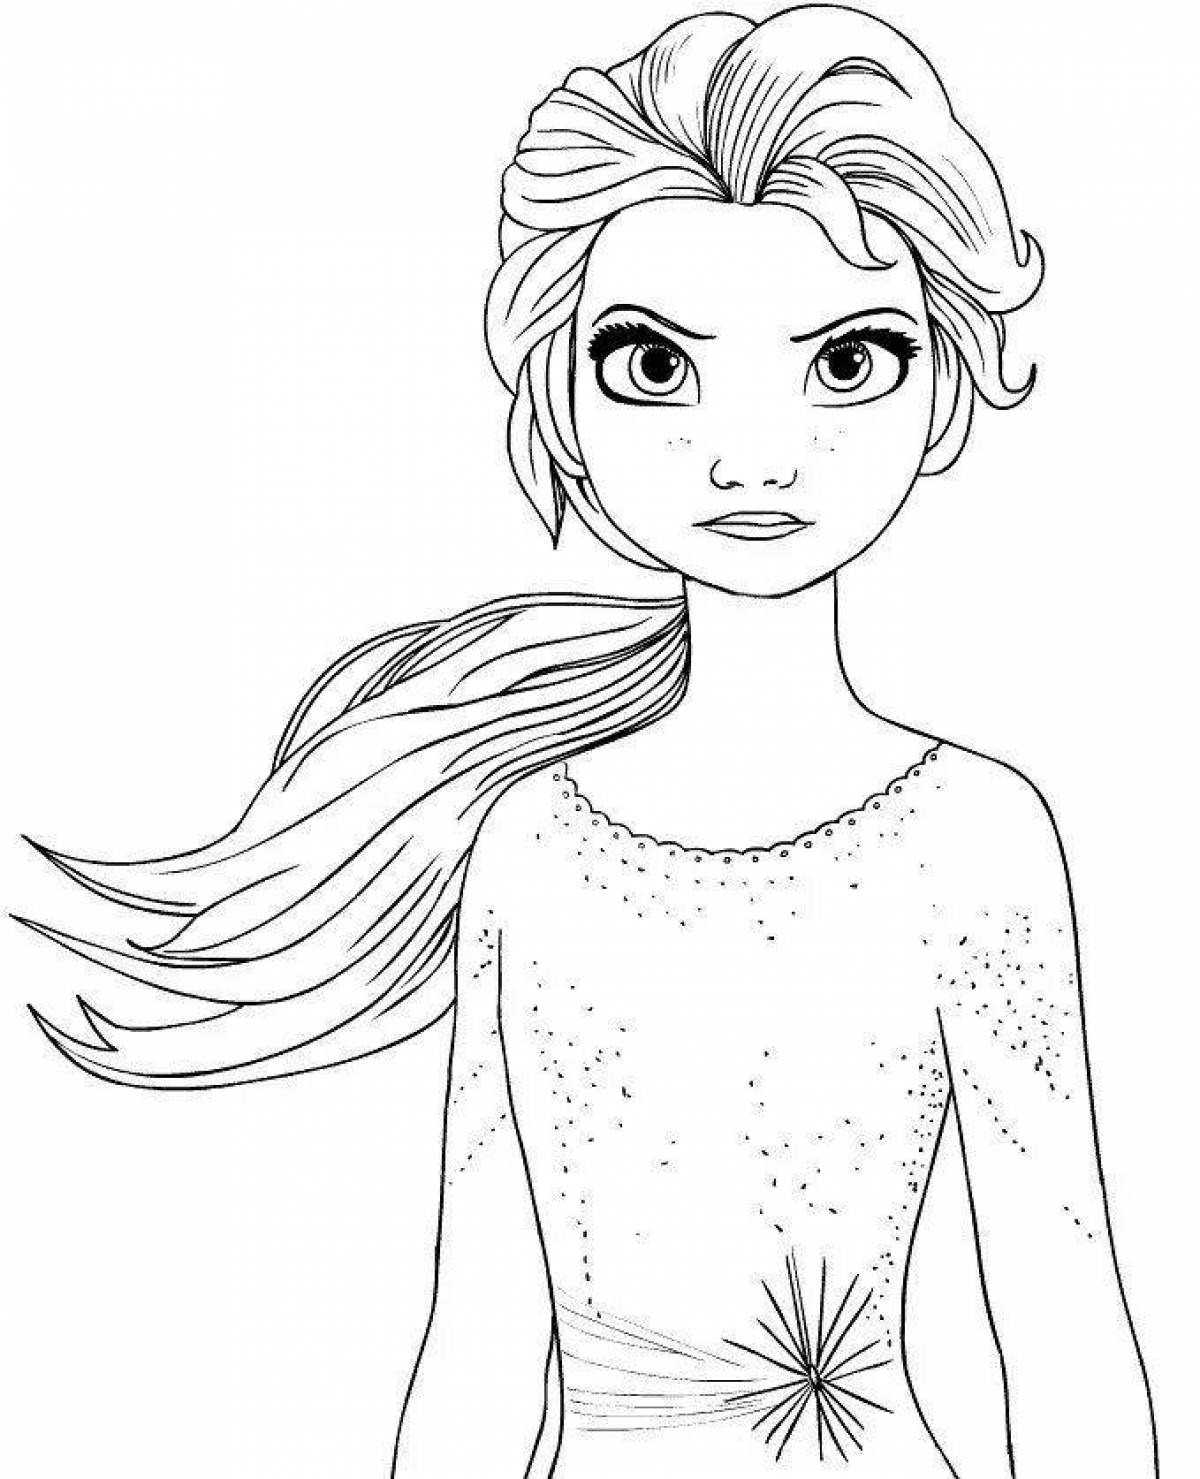 Radiant coloring elsa for children 3-4 years old